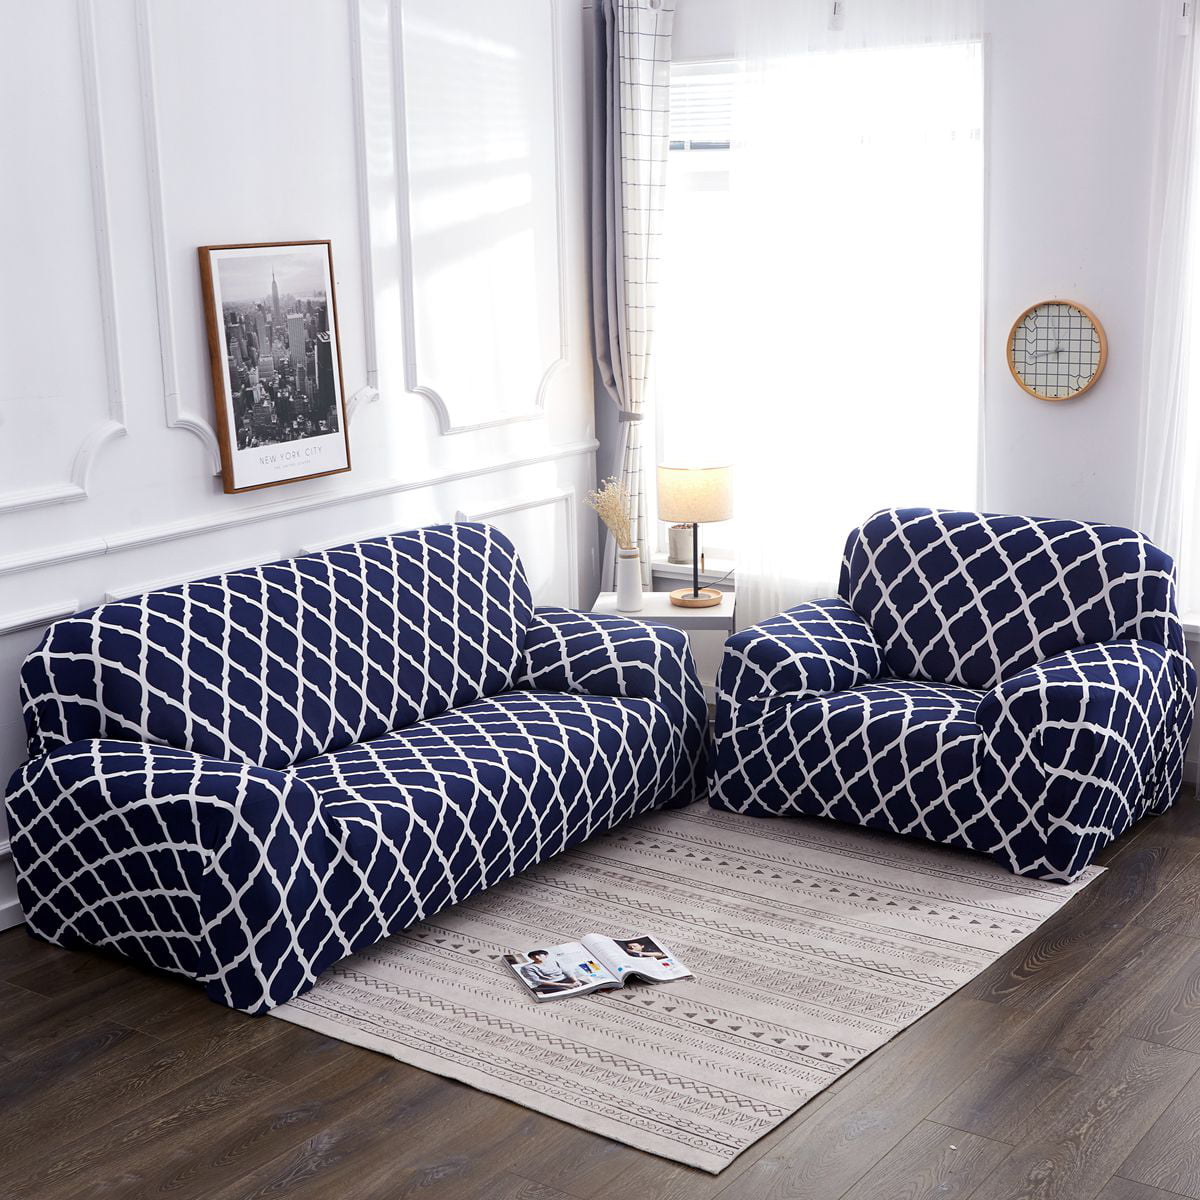 Details about   Four Season Non-Slip Sofa Cover Slipcover Washable Elastic Printed All-inclusive 